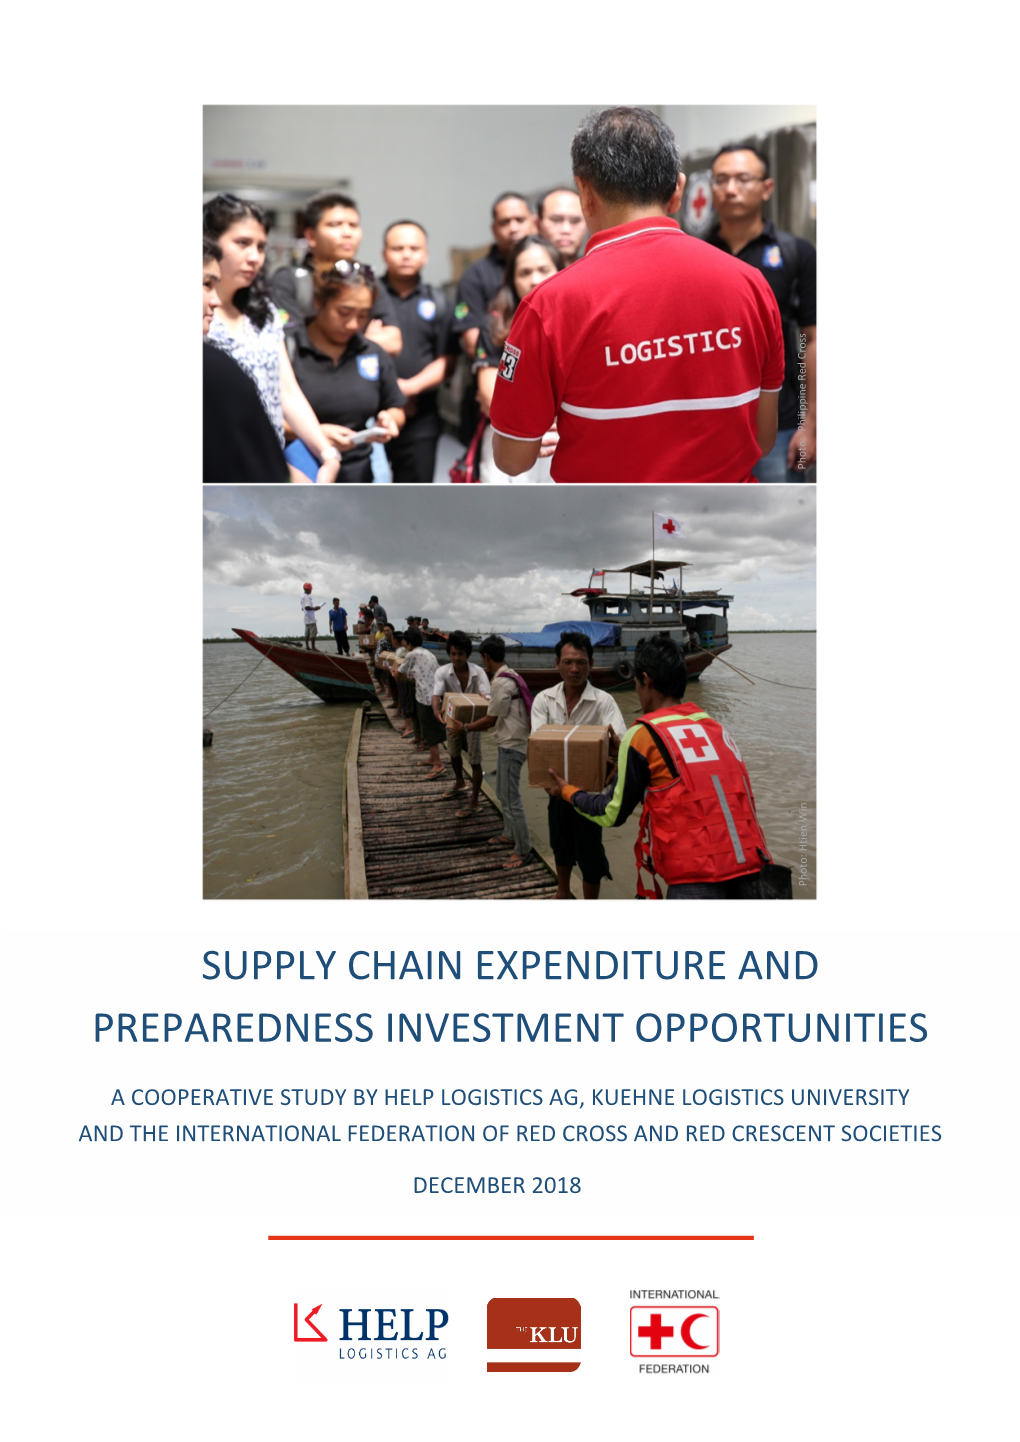 Supply Chain Expenditure and Preparedness Investment Opportunities